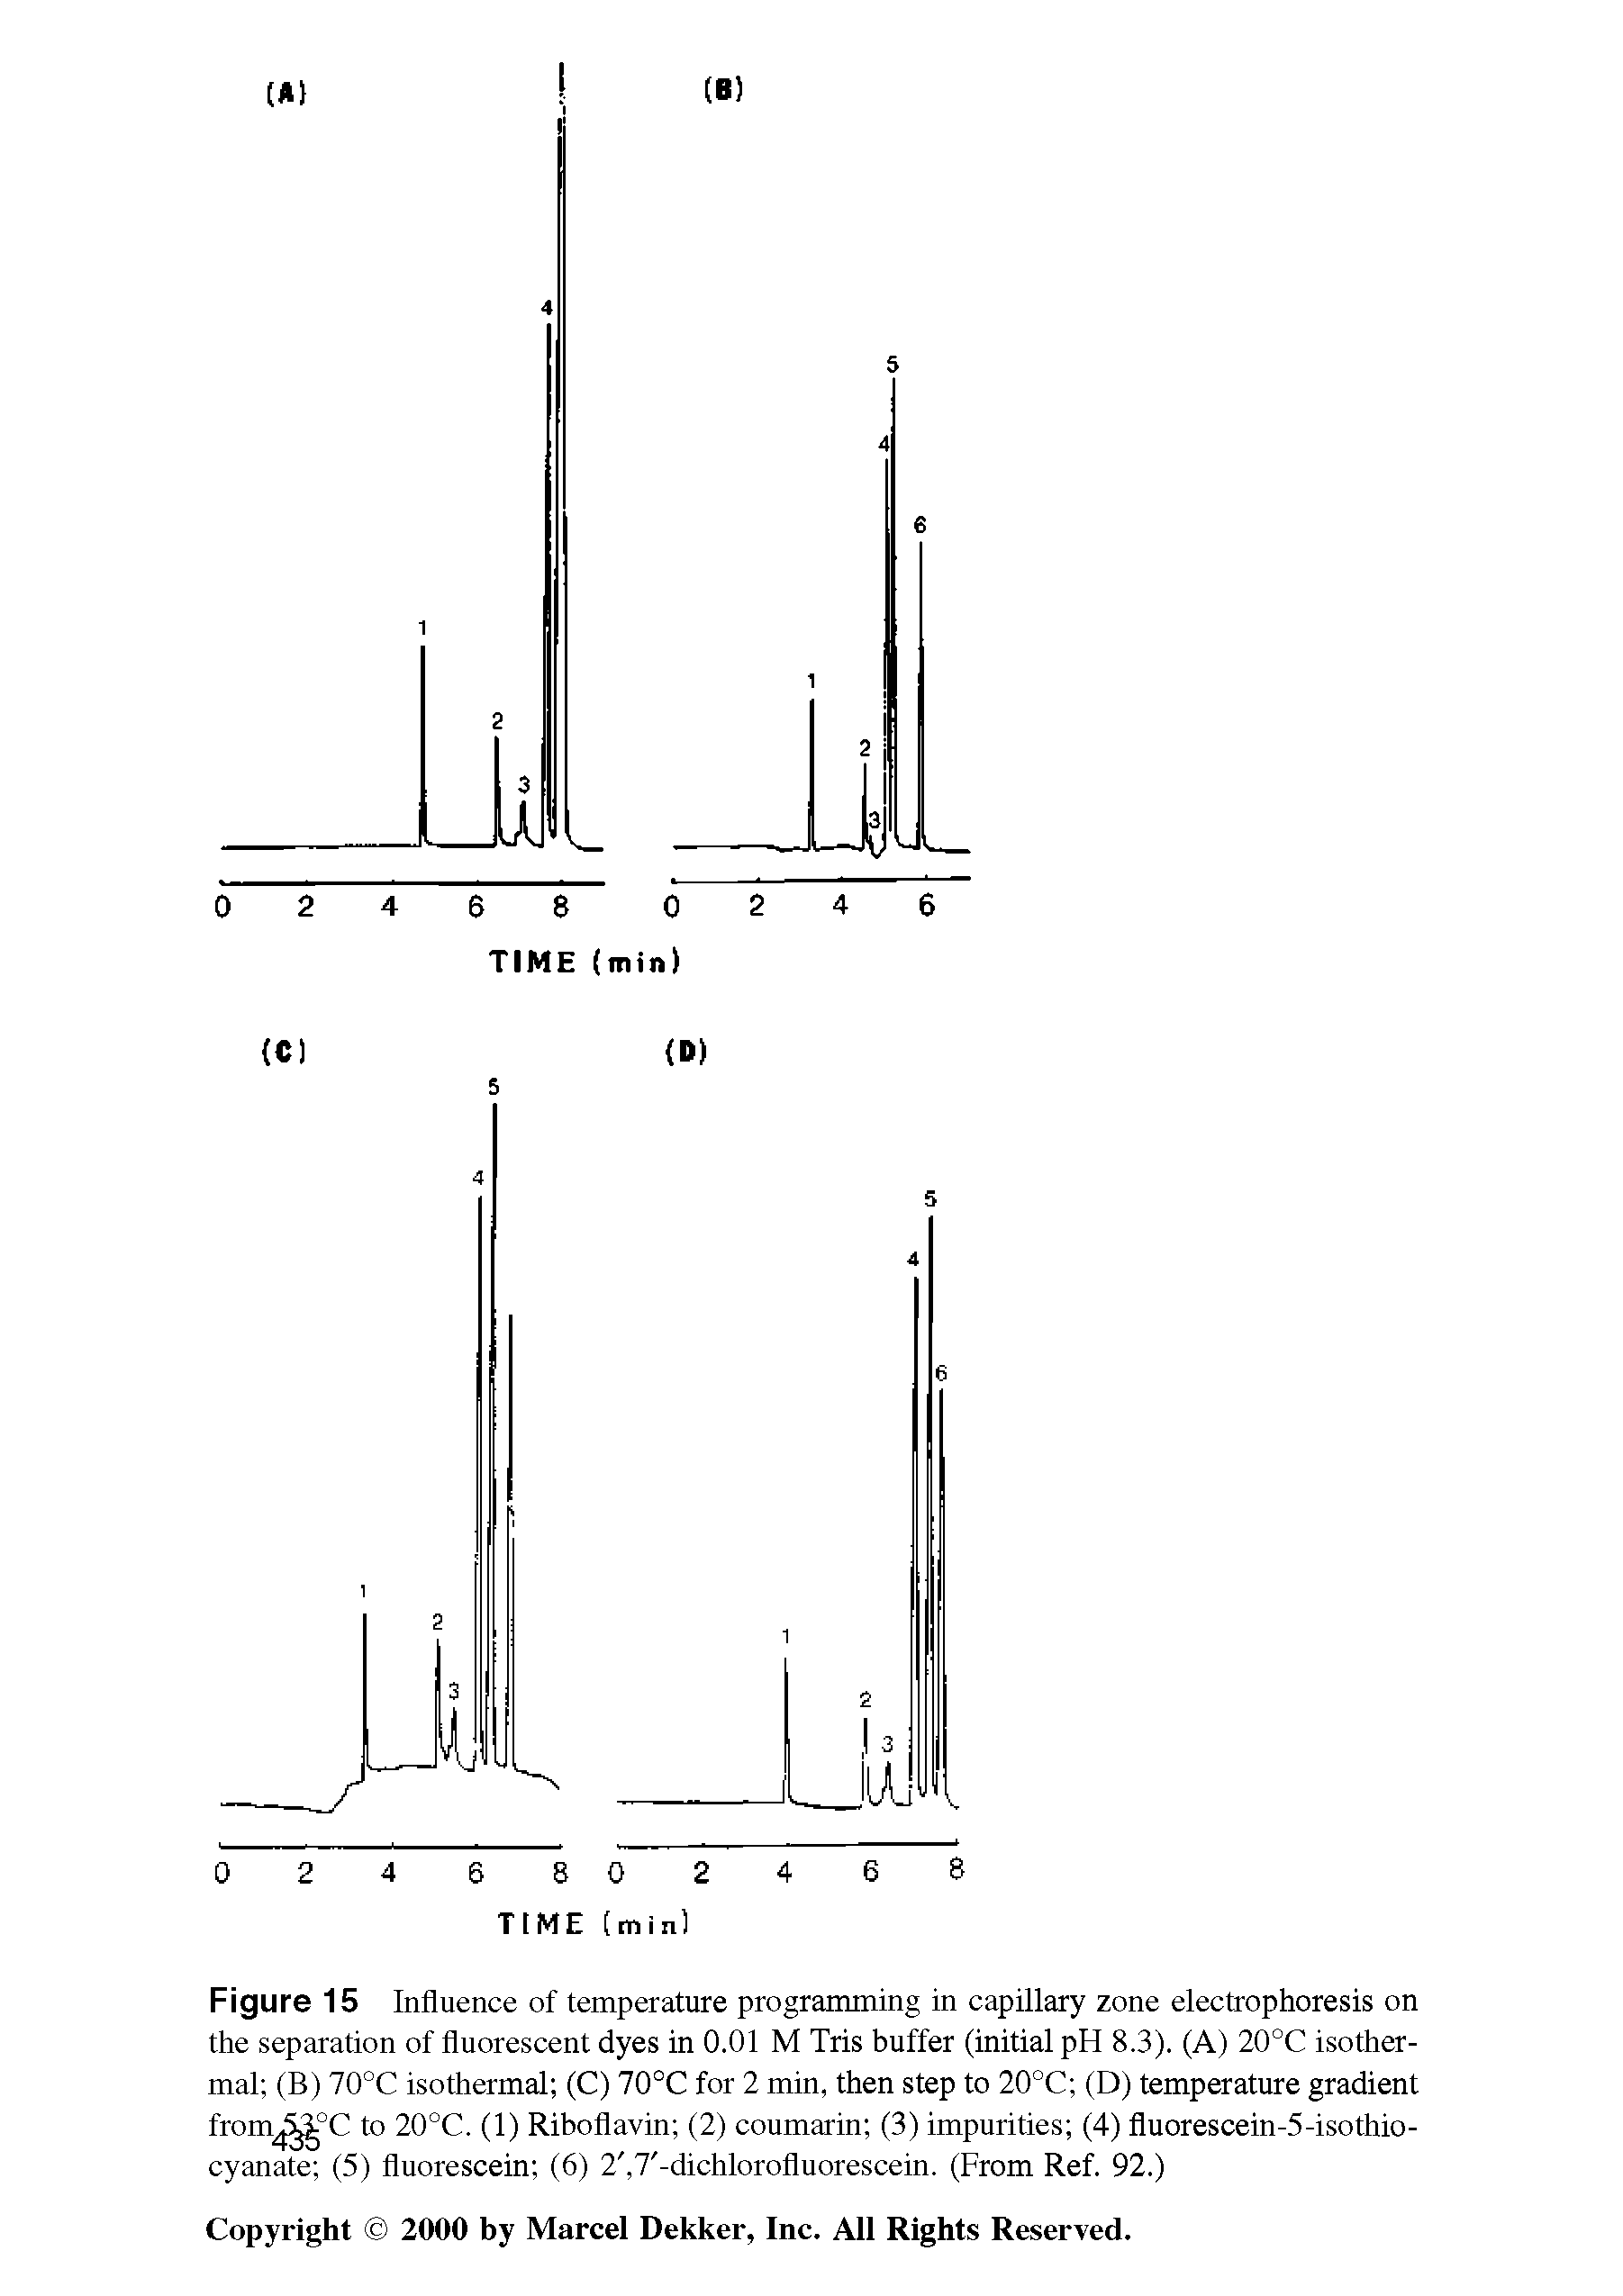 Figure 15 Influence of temperature programming in capillary zone electrophoresis on the separation of fluorescent dyes in 0.01 M Tiis buffer (initial pH 8.3). (A) 20°C isothermal (B) 70°C isothermal (C) 70°C for 2 min, then step to 20°C (D) temperature gradient from °C to 20°C. (1) Riboflavin (2) coumarin (3) impurities (4) fluorescein-5-isothio-cyanate (5) fluorescein (6) 2, 7 -dichlorofluorescein. (From Ref. 92.)...